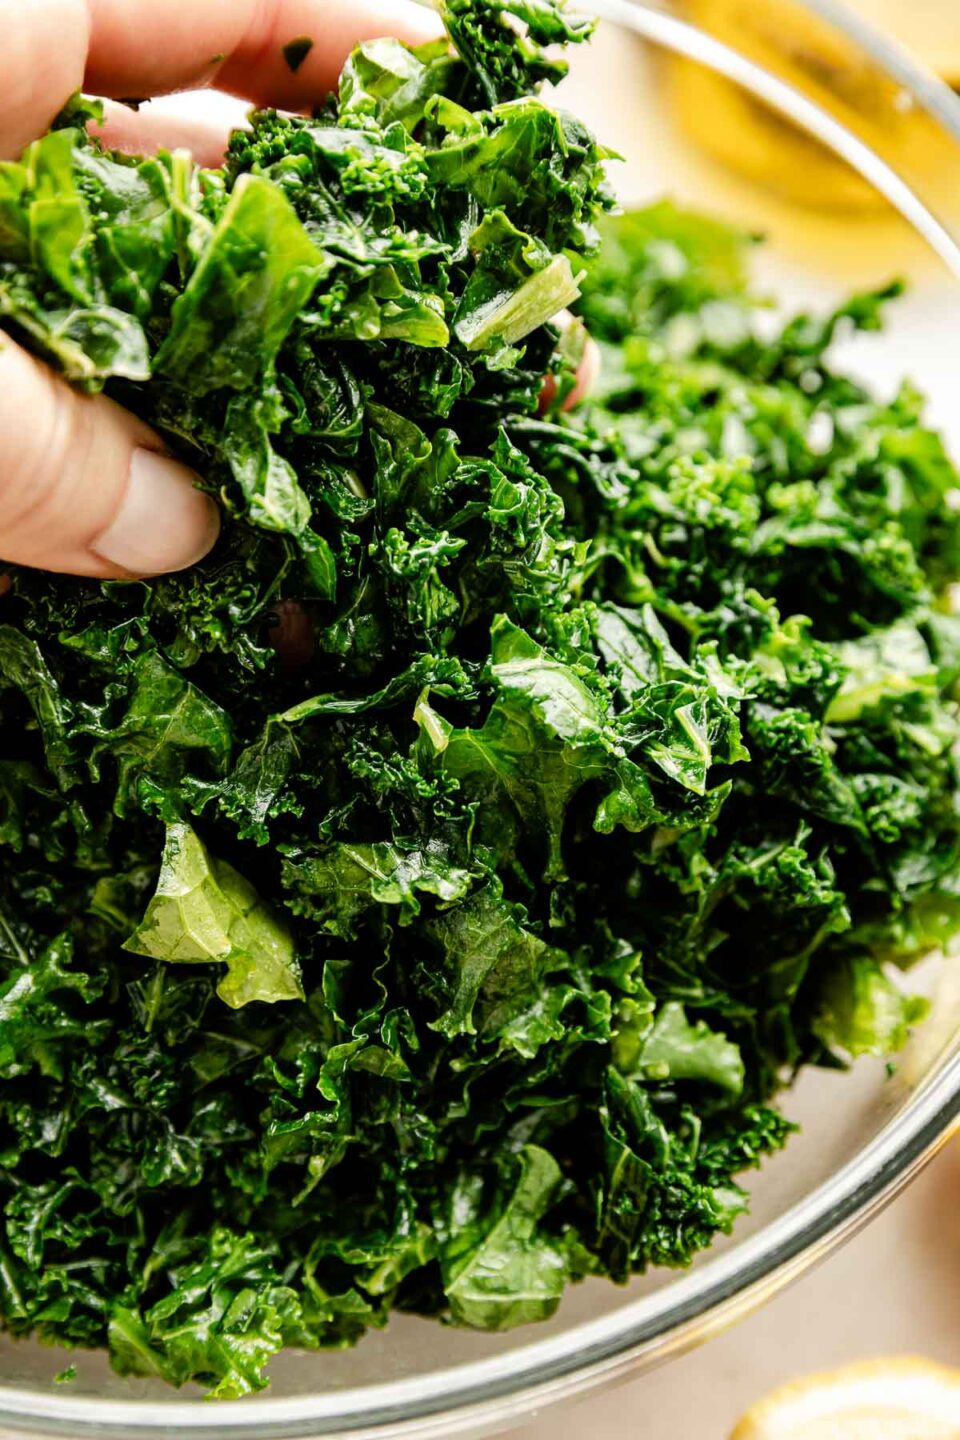 A close-up shot of a woman's hand holding up a handful of massaged kale over a glass bowl of kale.